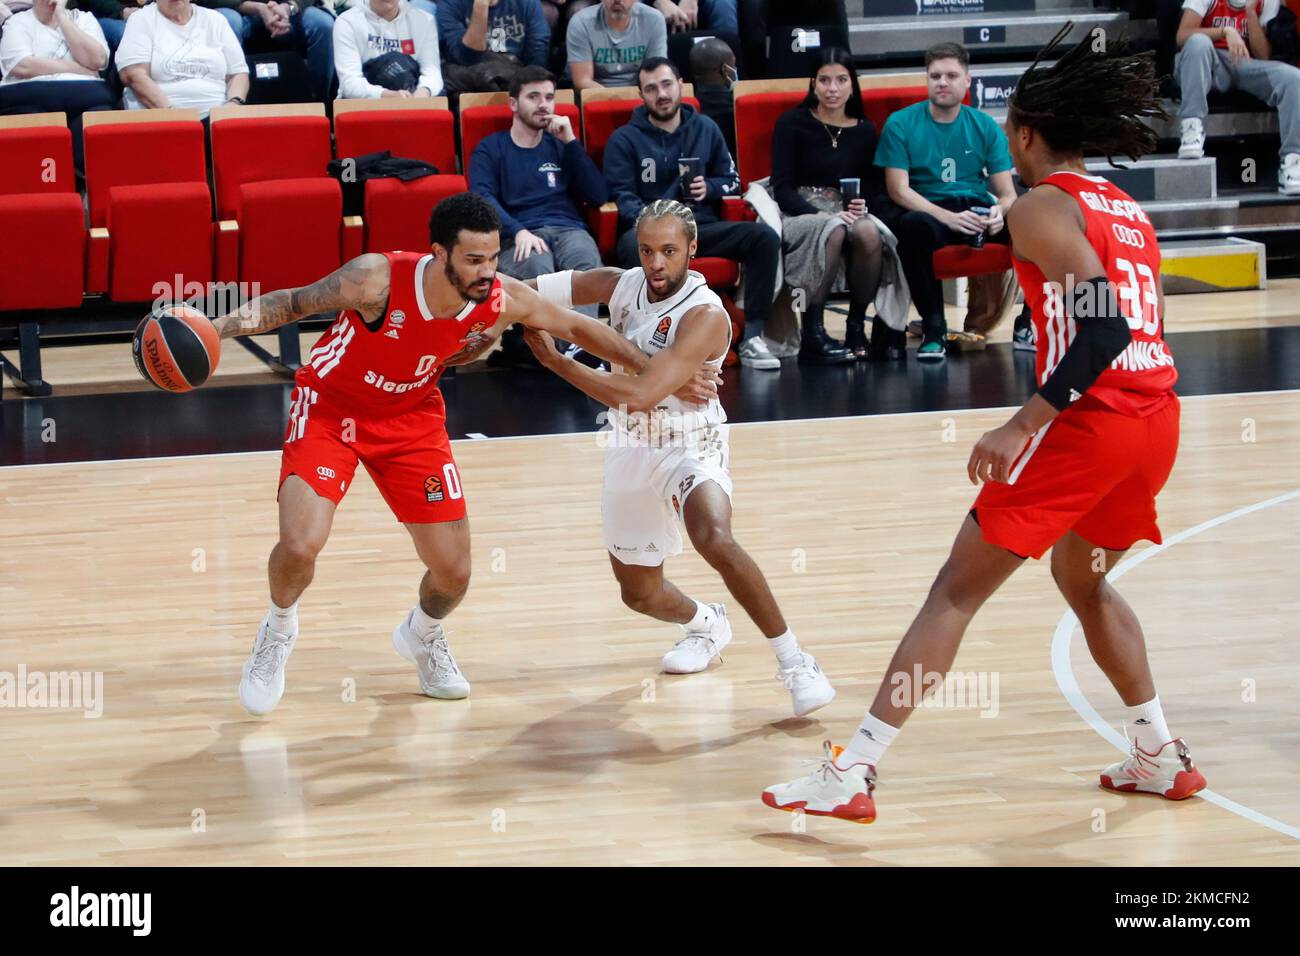 Nick WEILER BABB of Bayern Munich and Parker JACKSON CARTWRIGHT of Lyon during the Turkish Airlines EuroLeague Basketball match between LDLC ASVEL Villeurbanne and FC Bayern Munich on November 23, 2022 at Astroballe in Villeurbanne, France - Photo Romain Biard / Isports / DPPI Stock Photo